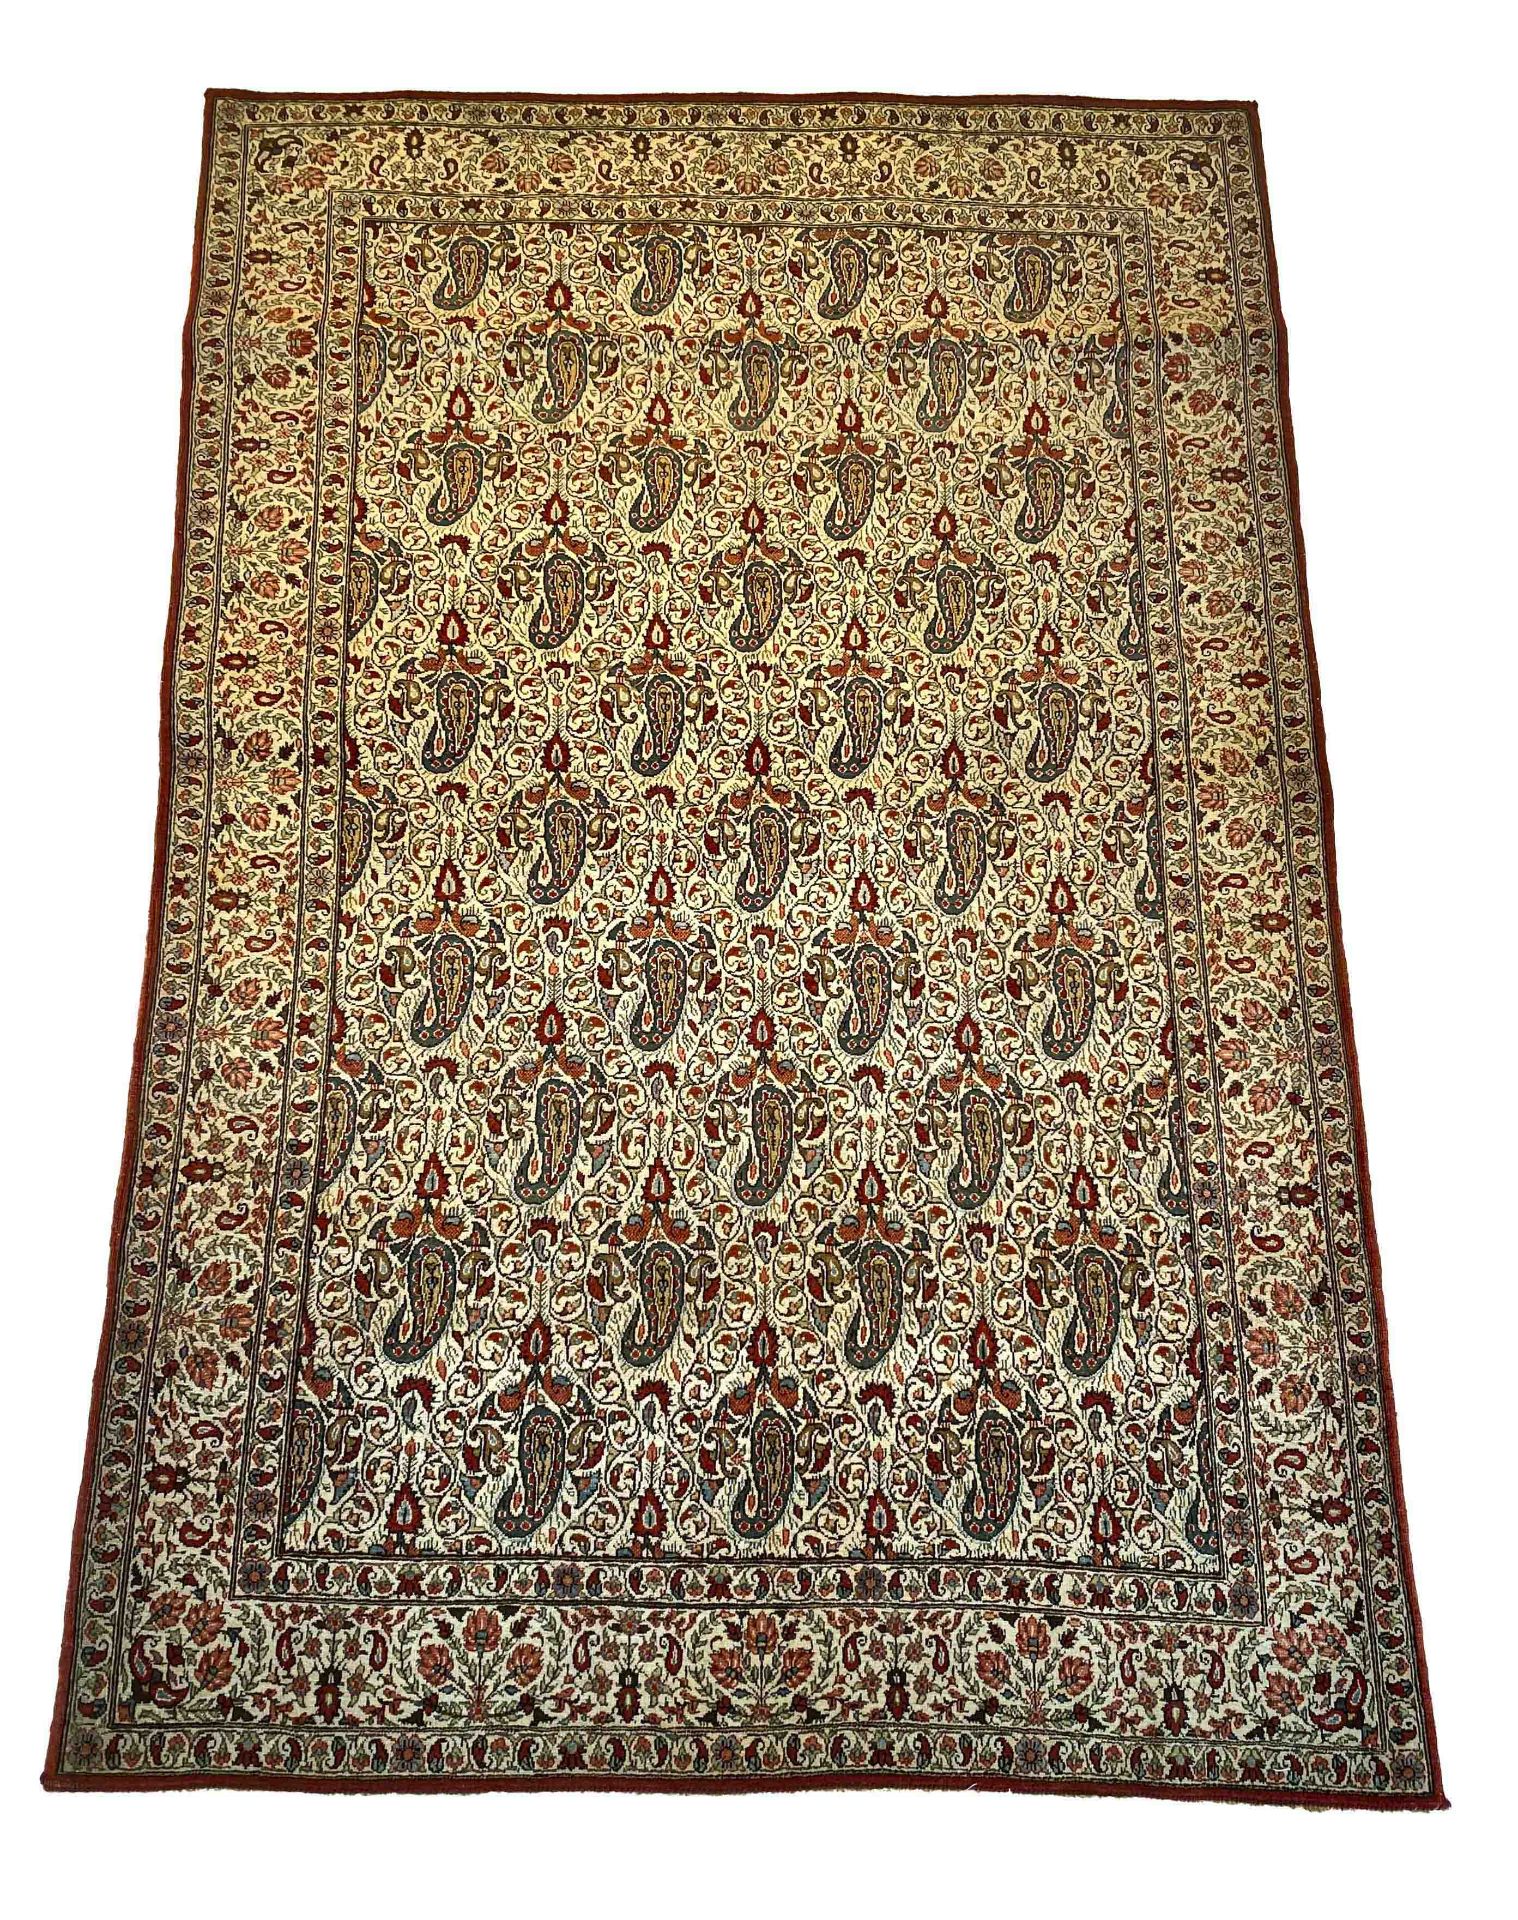 Carpet, Gohm, minor wear, 205 x 140 cm - The carpet can only be viewed and collected at another